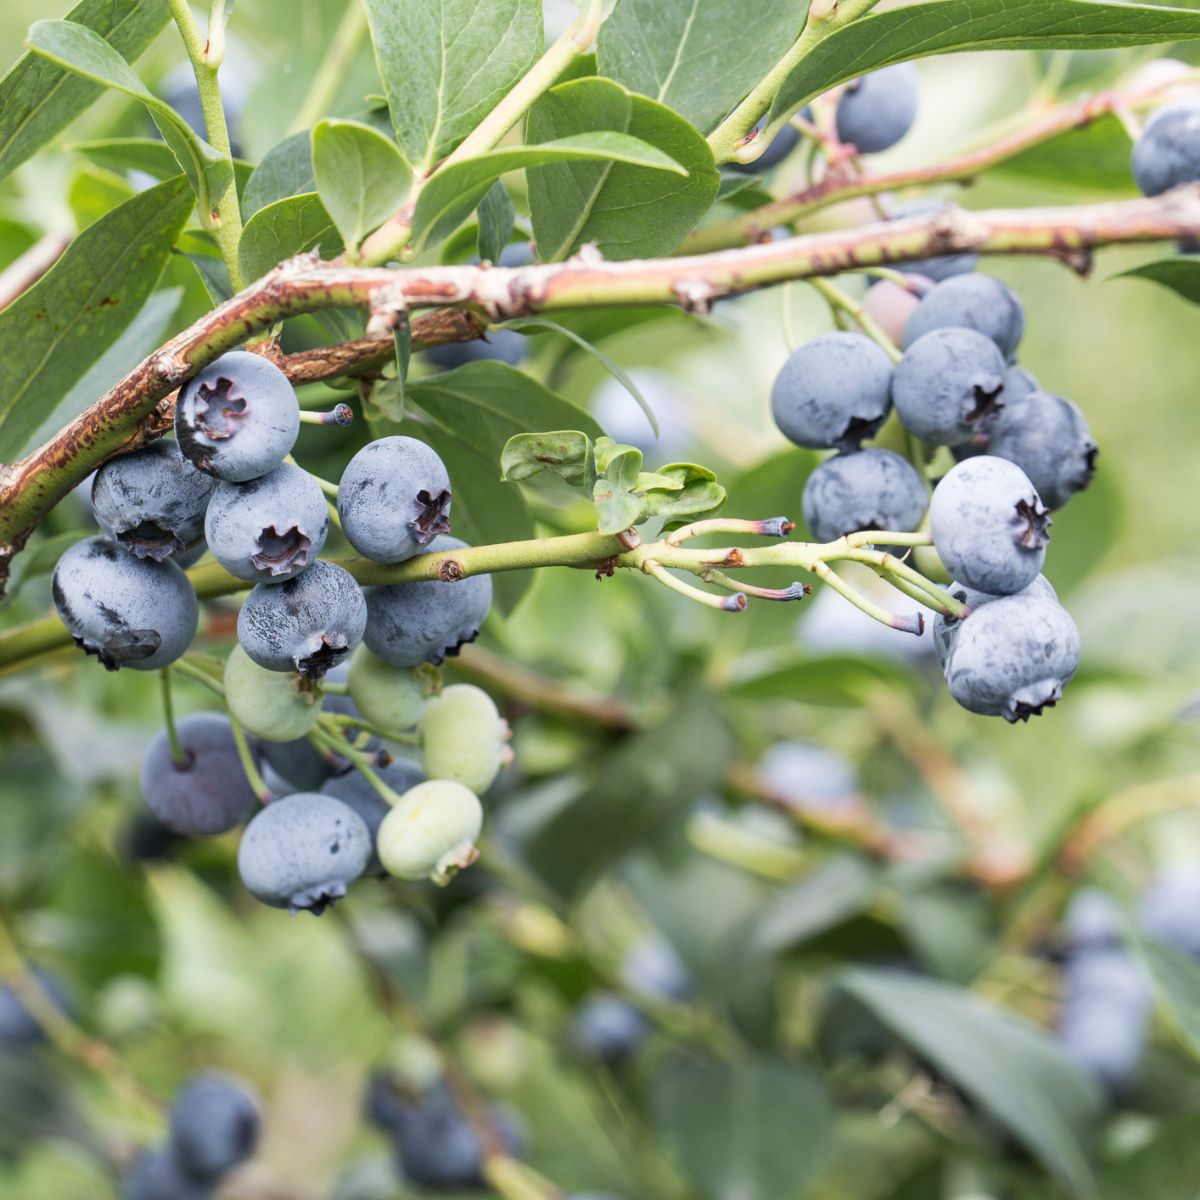 Powder Blue Blueberry Bushes for Sale at Arbor Day's Online Tree